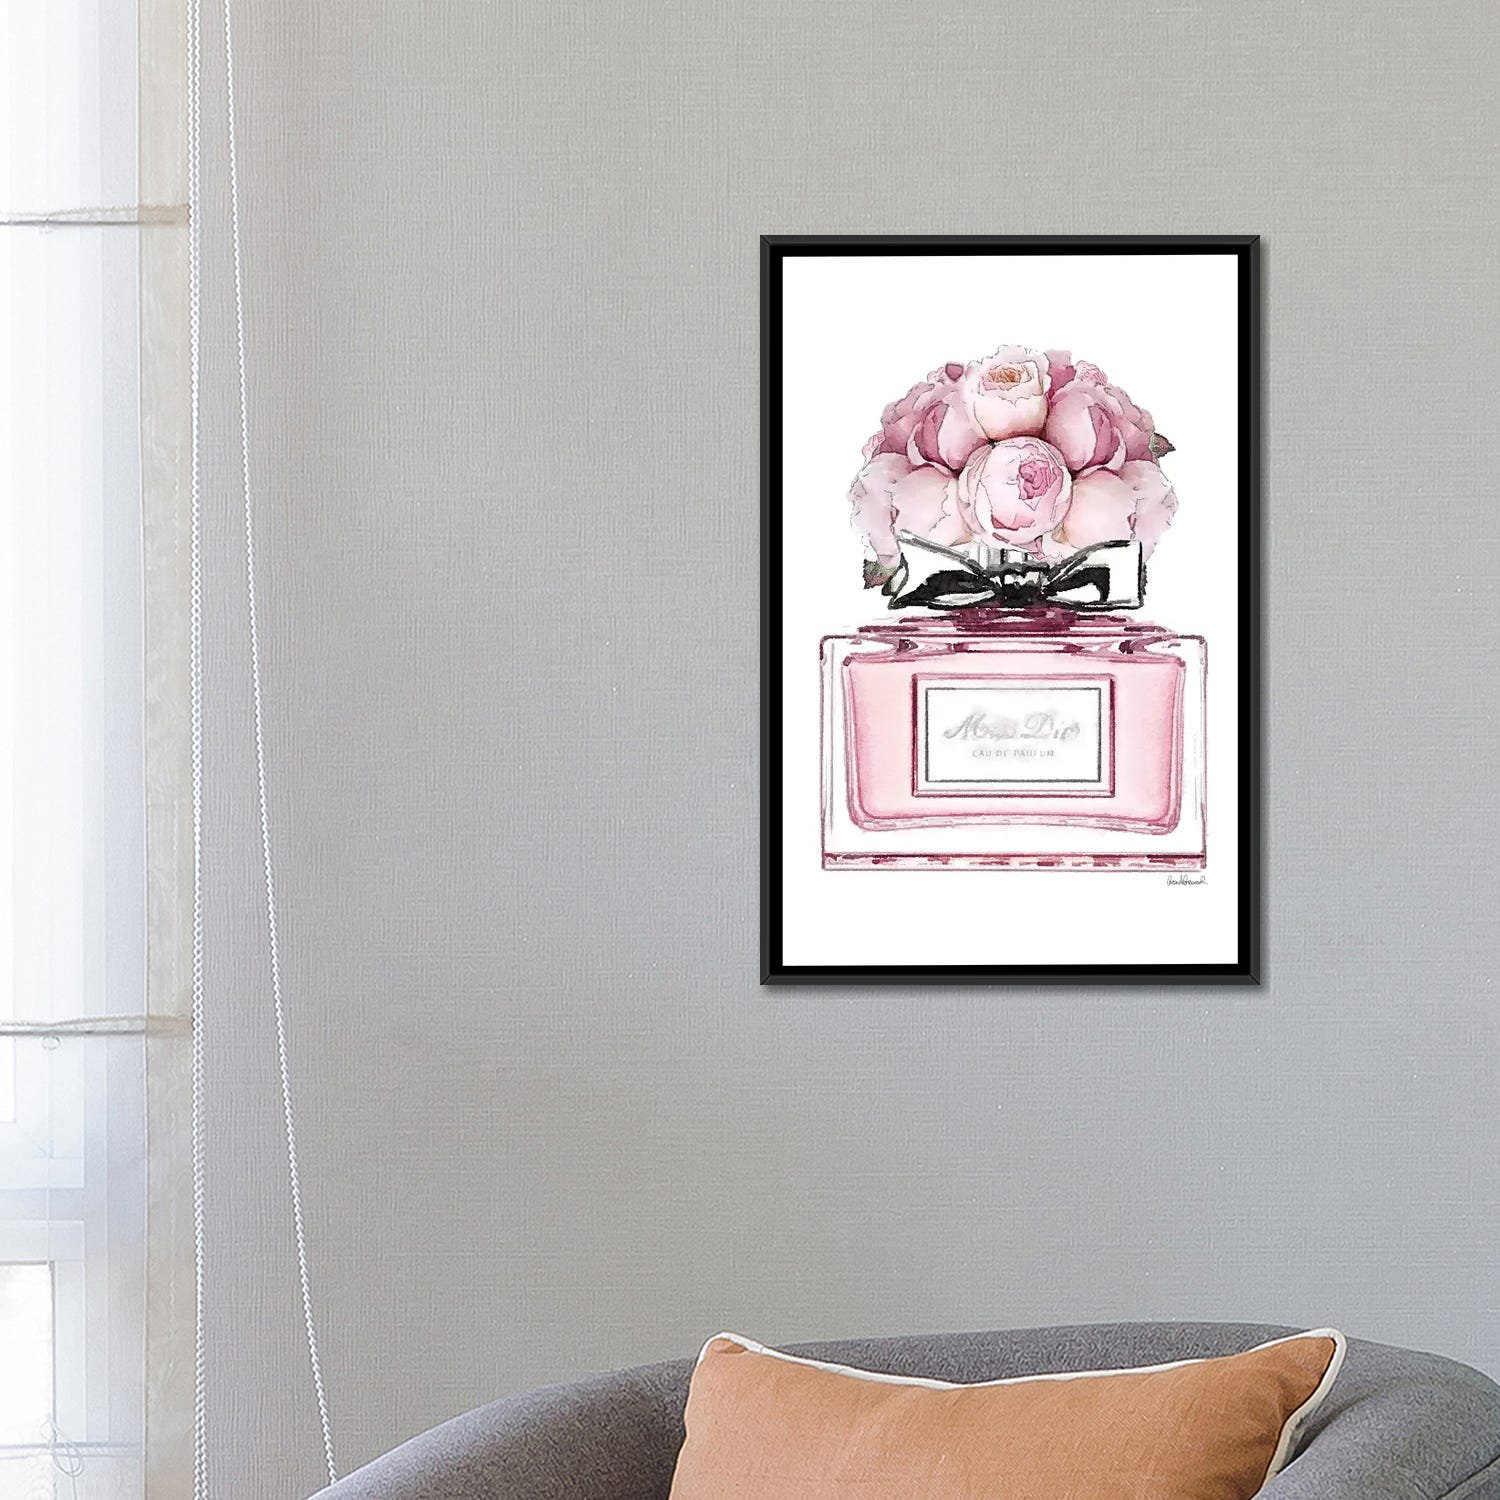 Bless international Short Perfume, Pink With Roses On Canvas by Amanda  Greenwood Painting